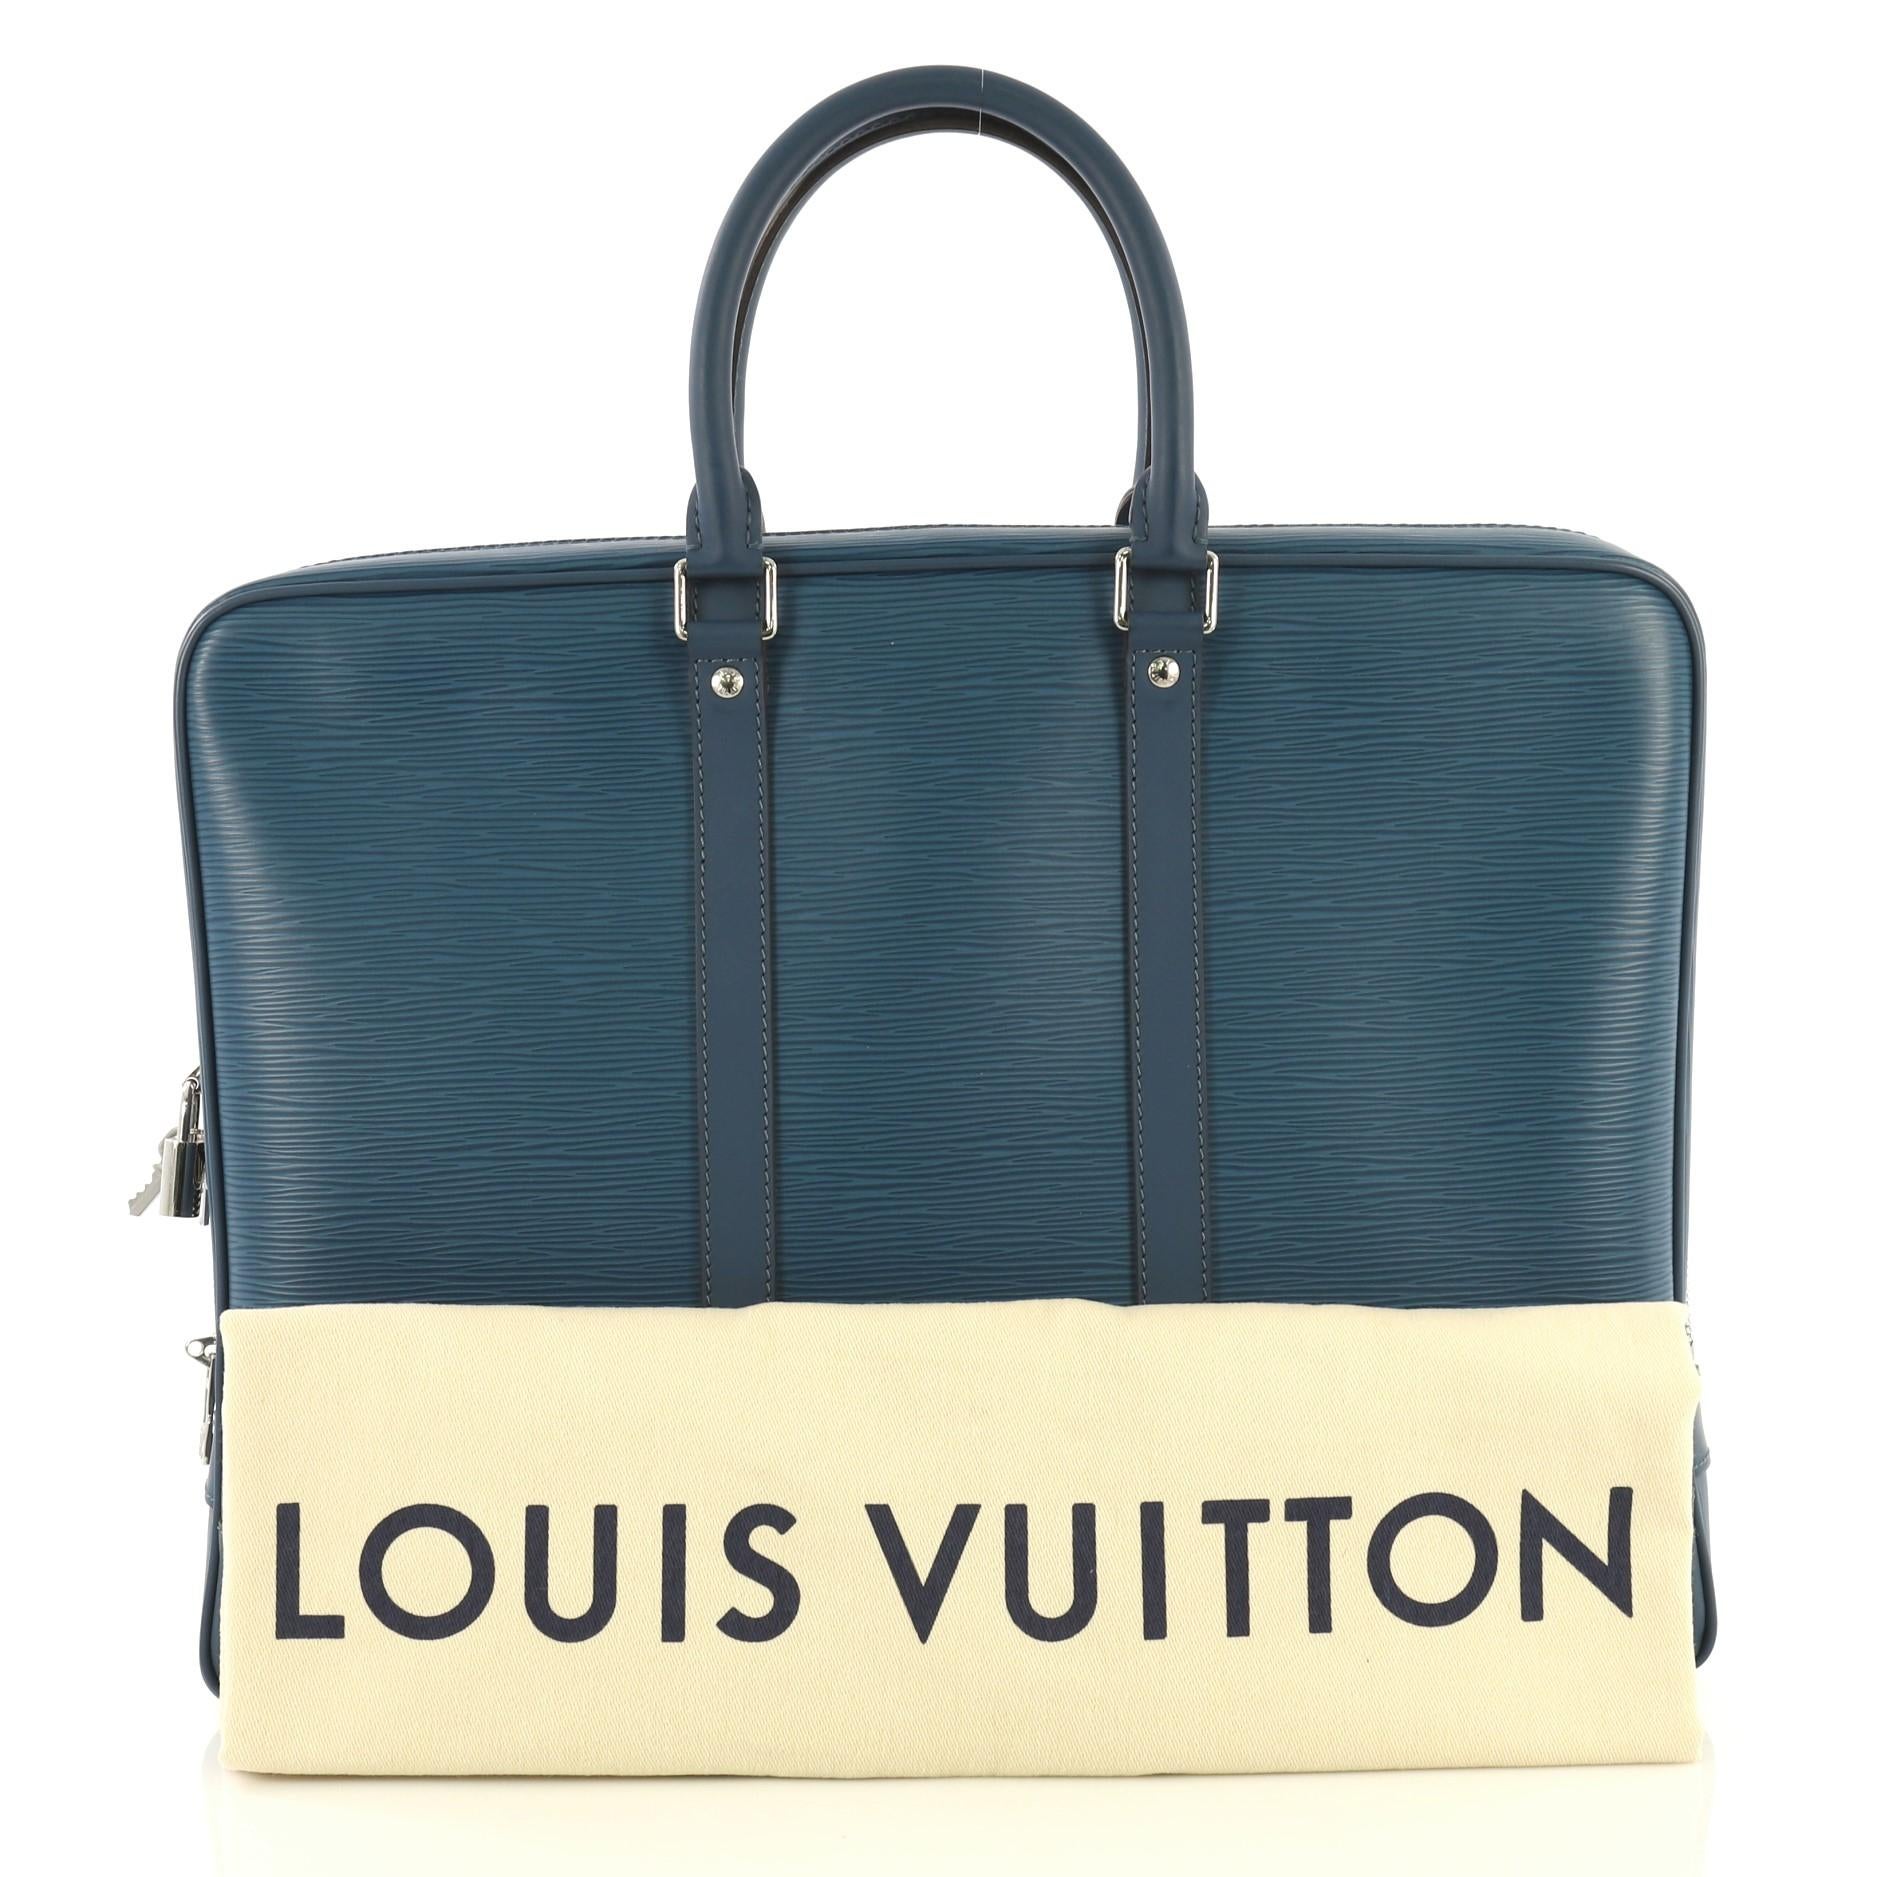 This Louis Vuitton Porte-Documents Voyage Briefcase Epi Leather, crafted in blue epi leather, features dual rolled handles, leather base corners, and silver-tone hardware. Its zip closure opens to a blue microfiber interior with side zip and slip